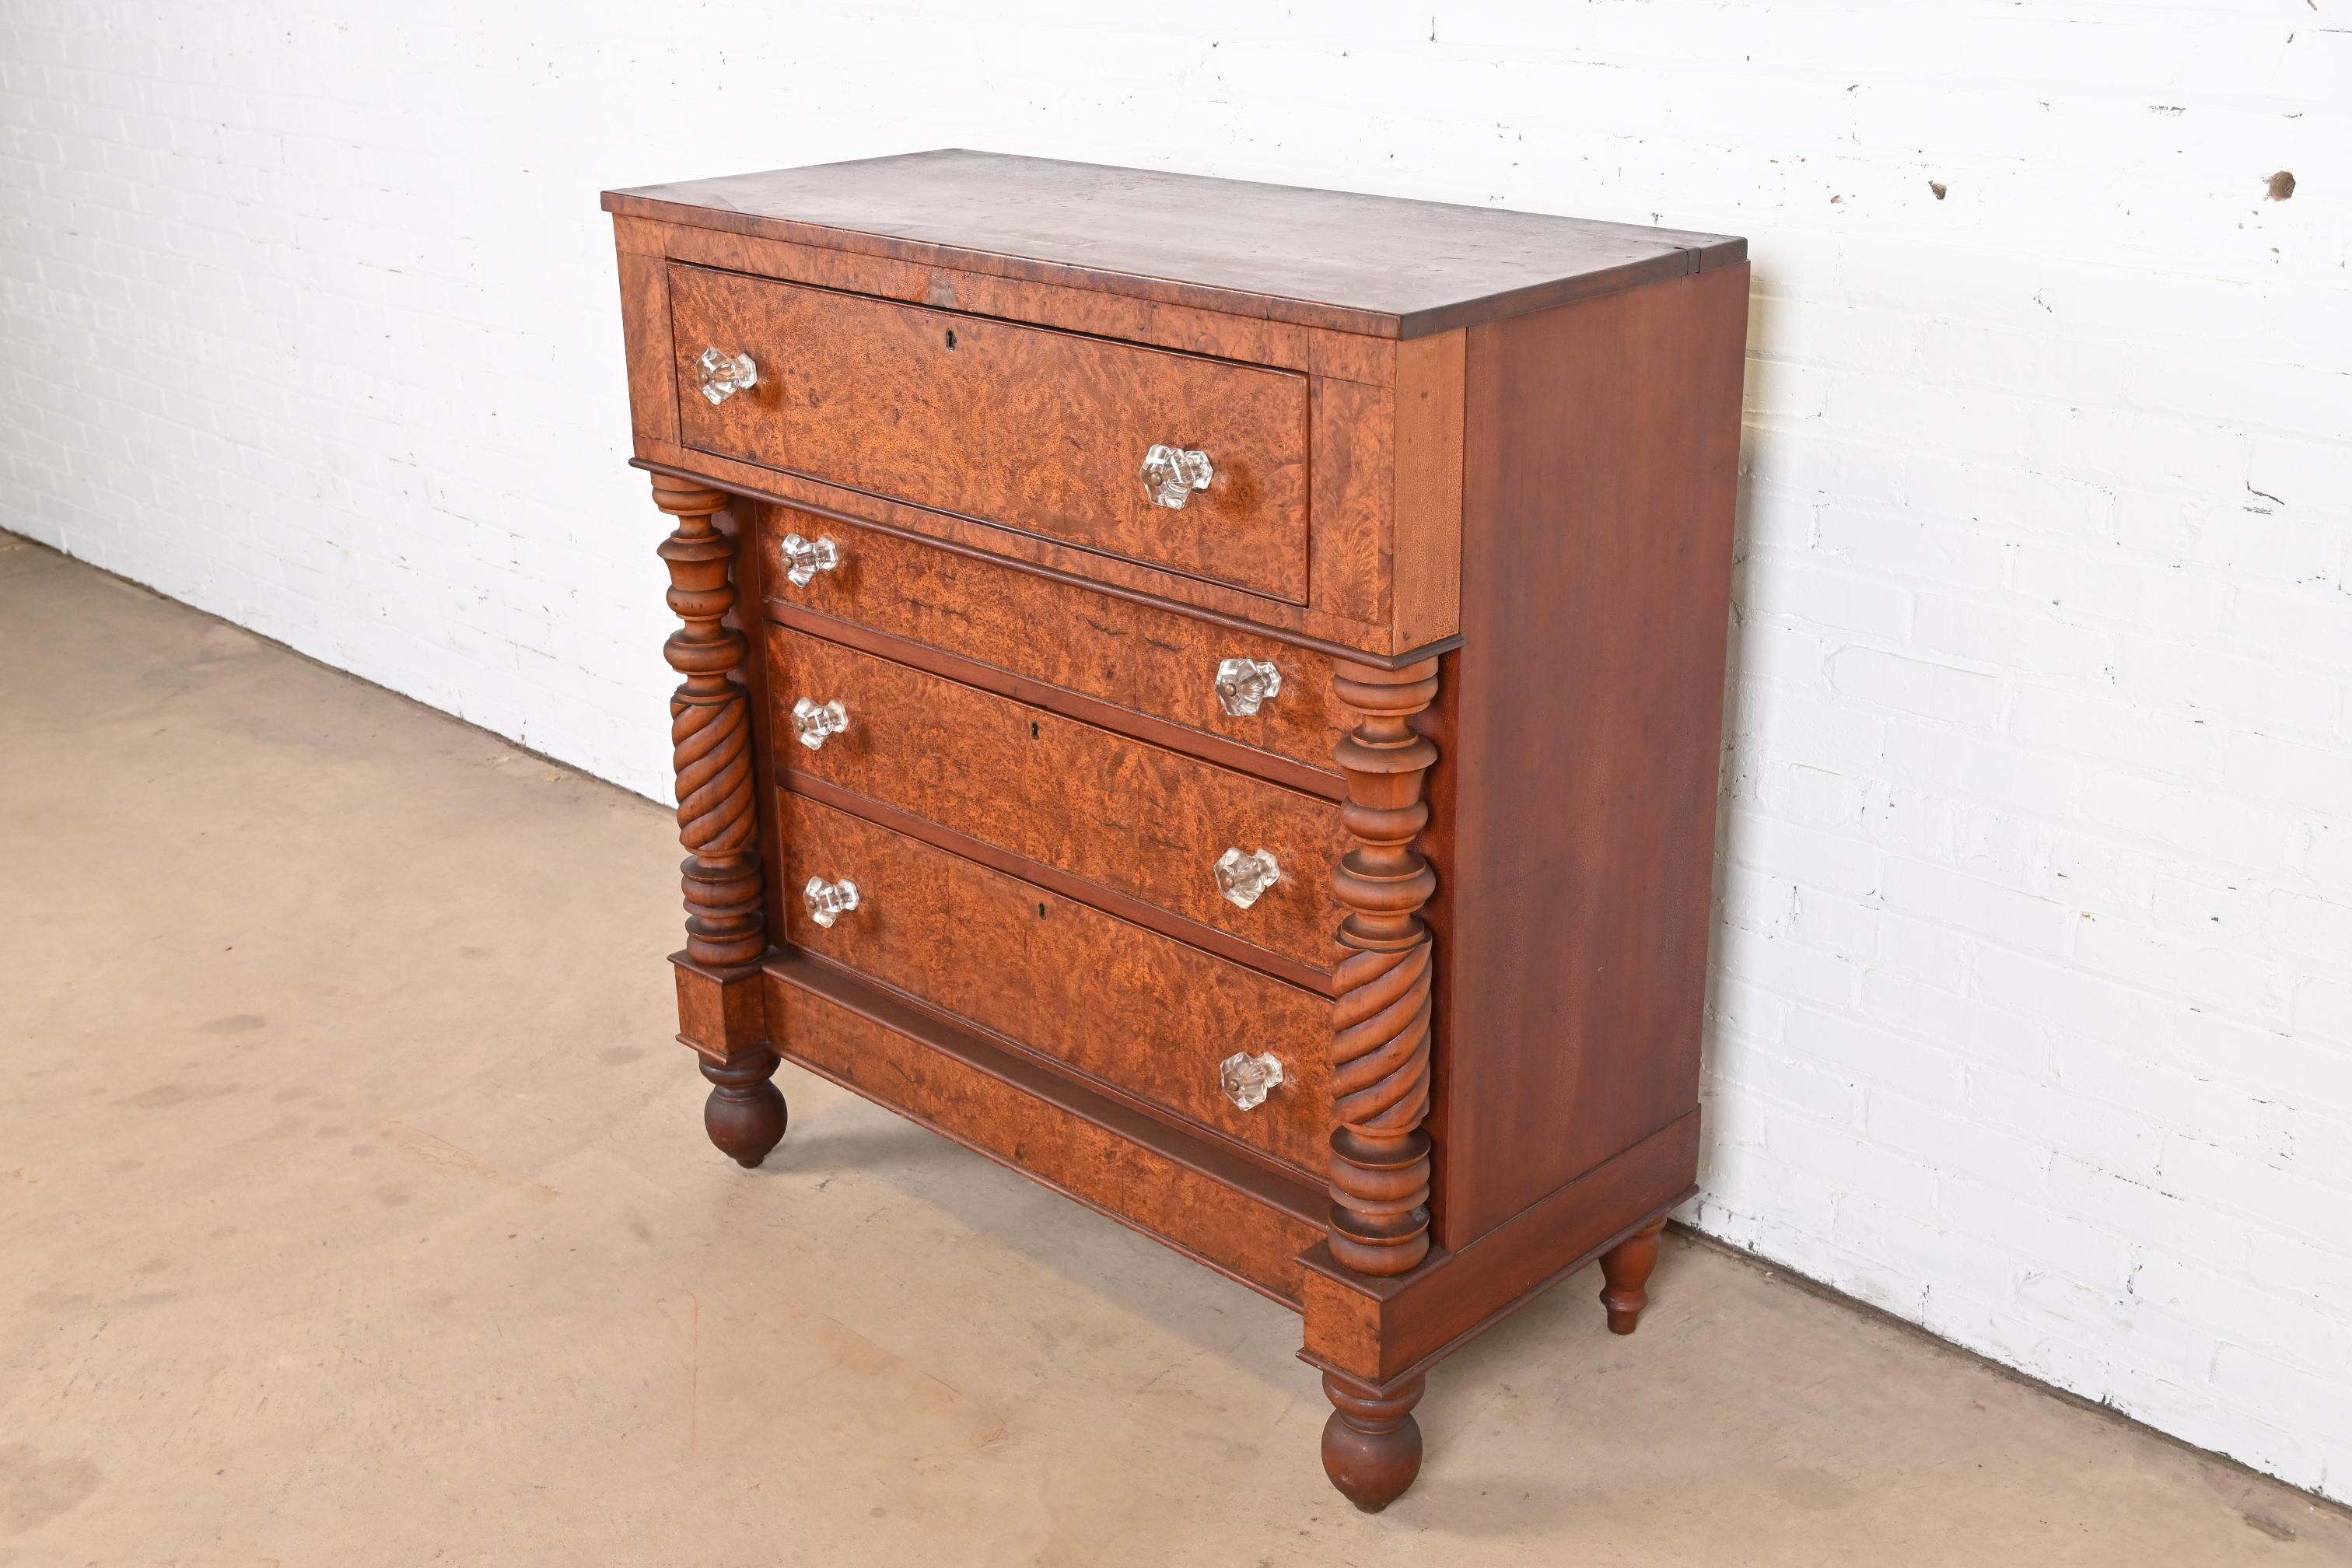 Antique American Empire Burled Mahogany Chest of Drawers, Circa 1820s For Sale 1